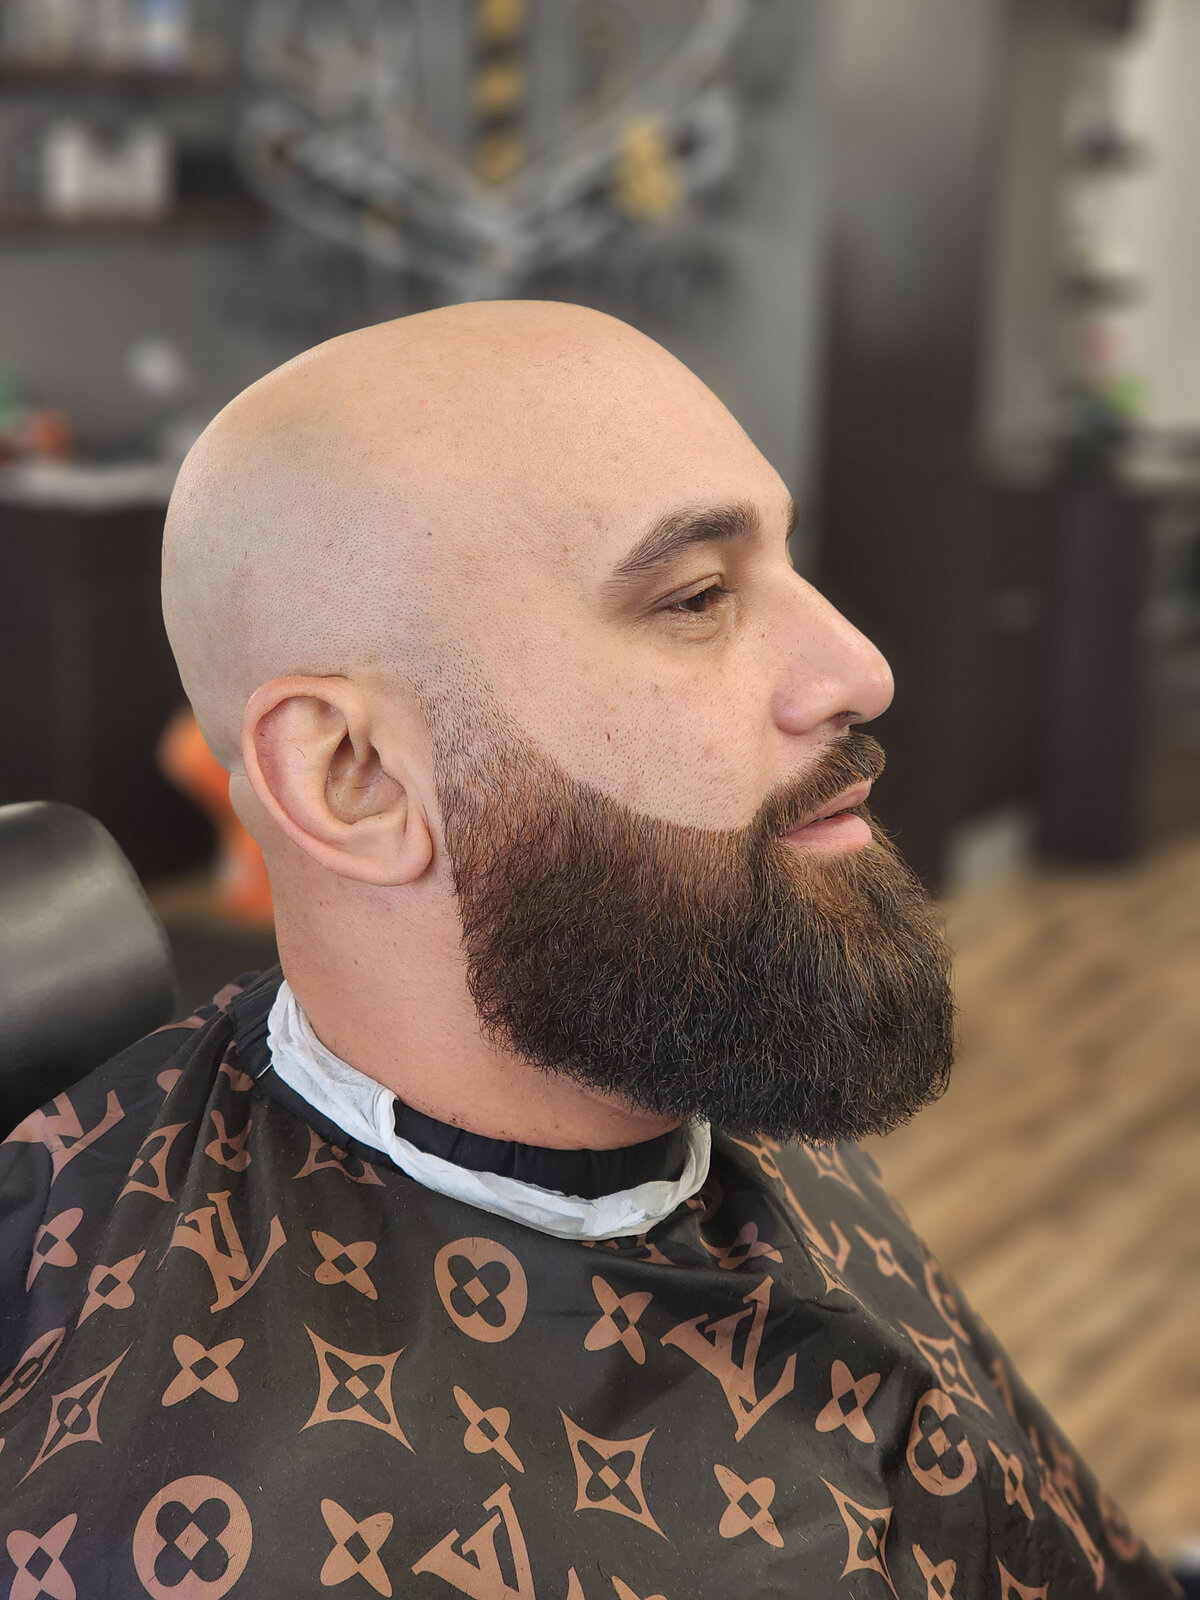 Clean Head Shave and Beard at Whos Your Barber In Venice Florida